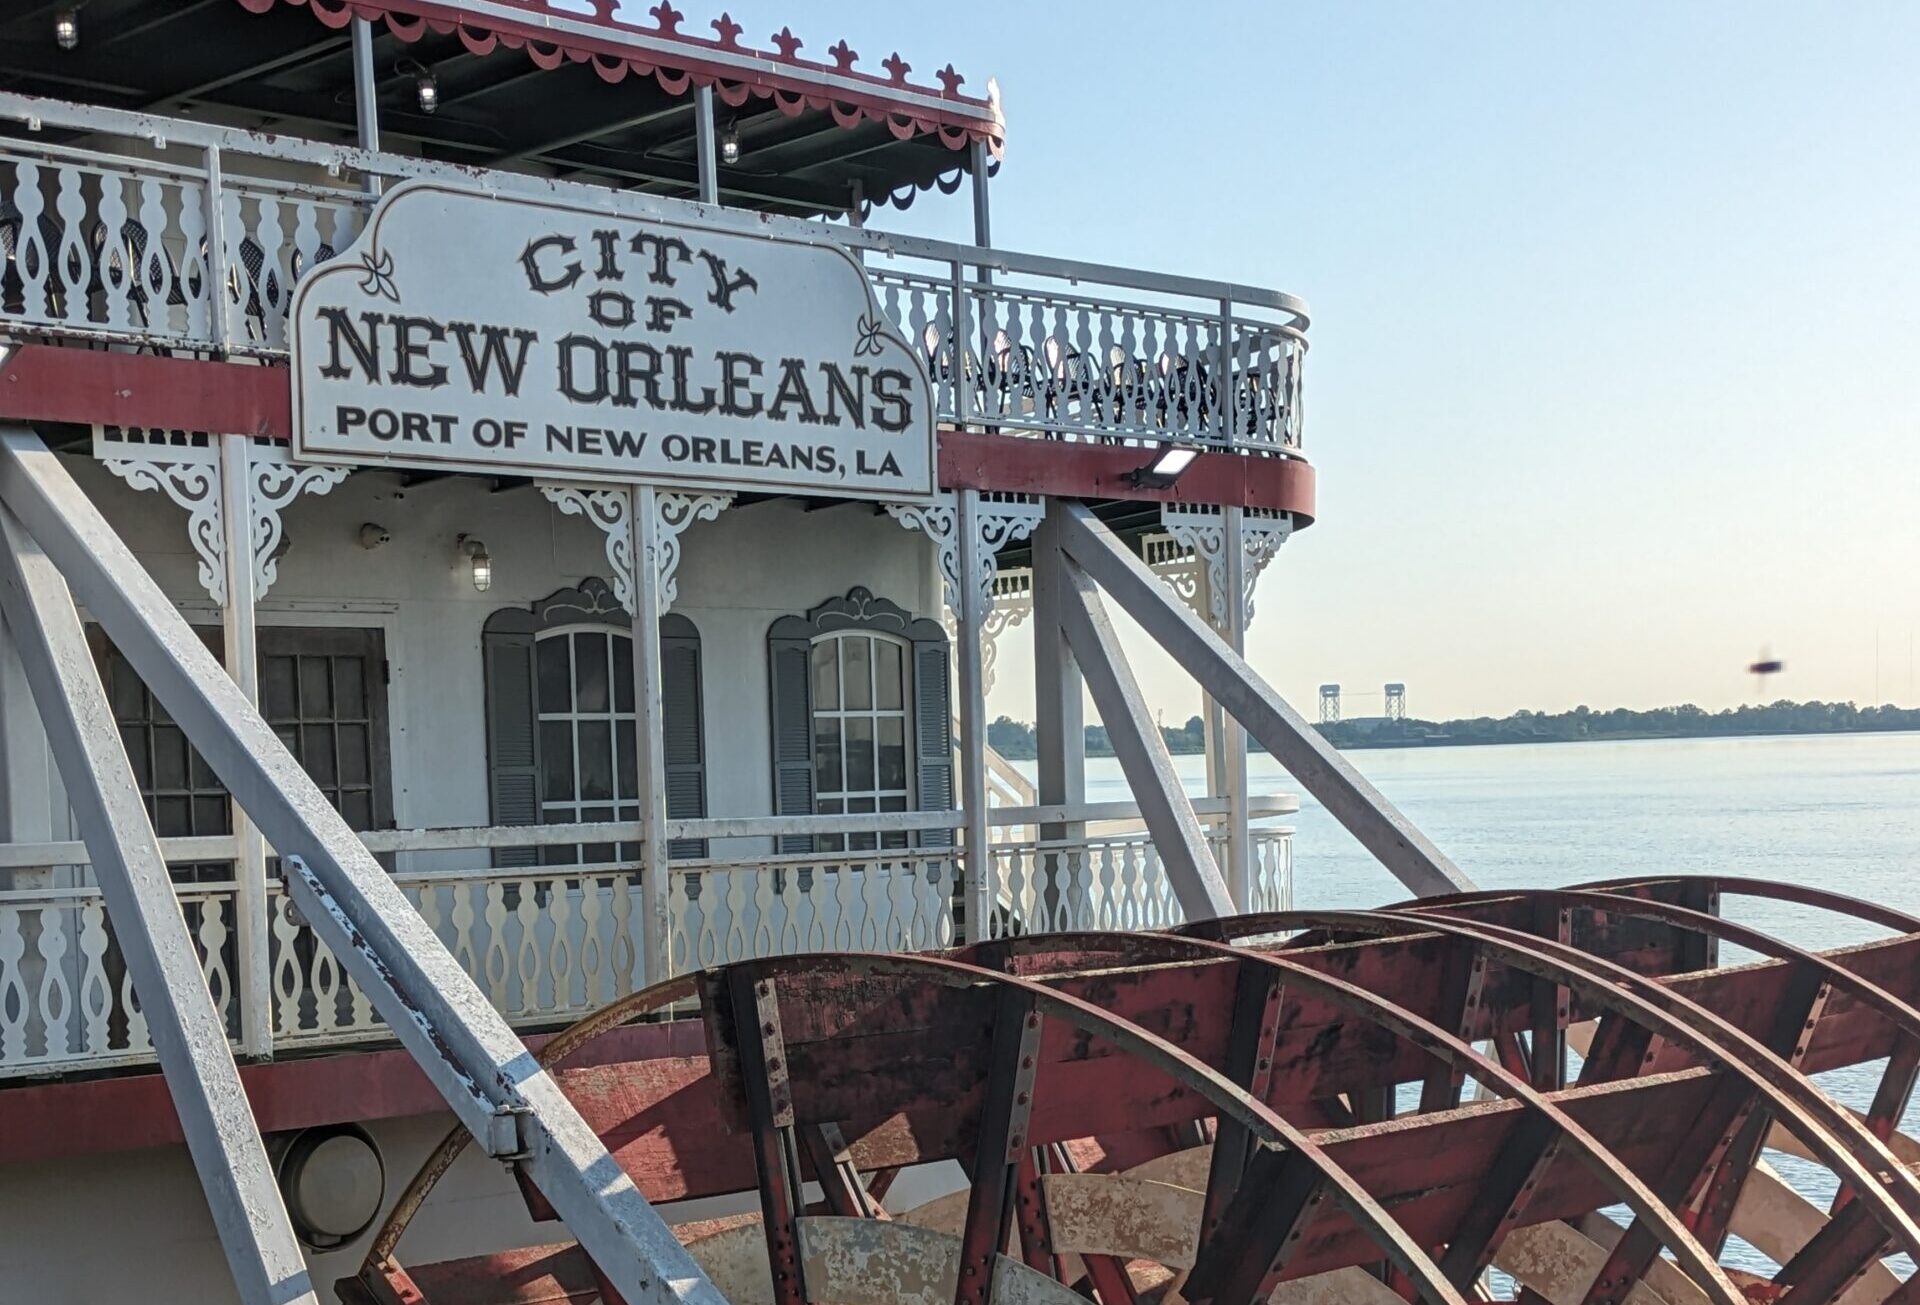 Image of a red and white boat with four large red circular paddles and a sign saying, “City of New Orleans” with water in the background.